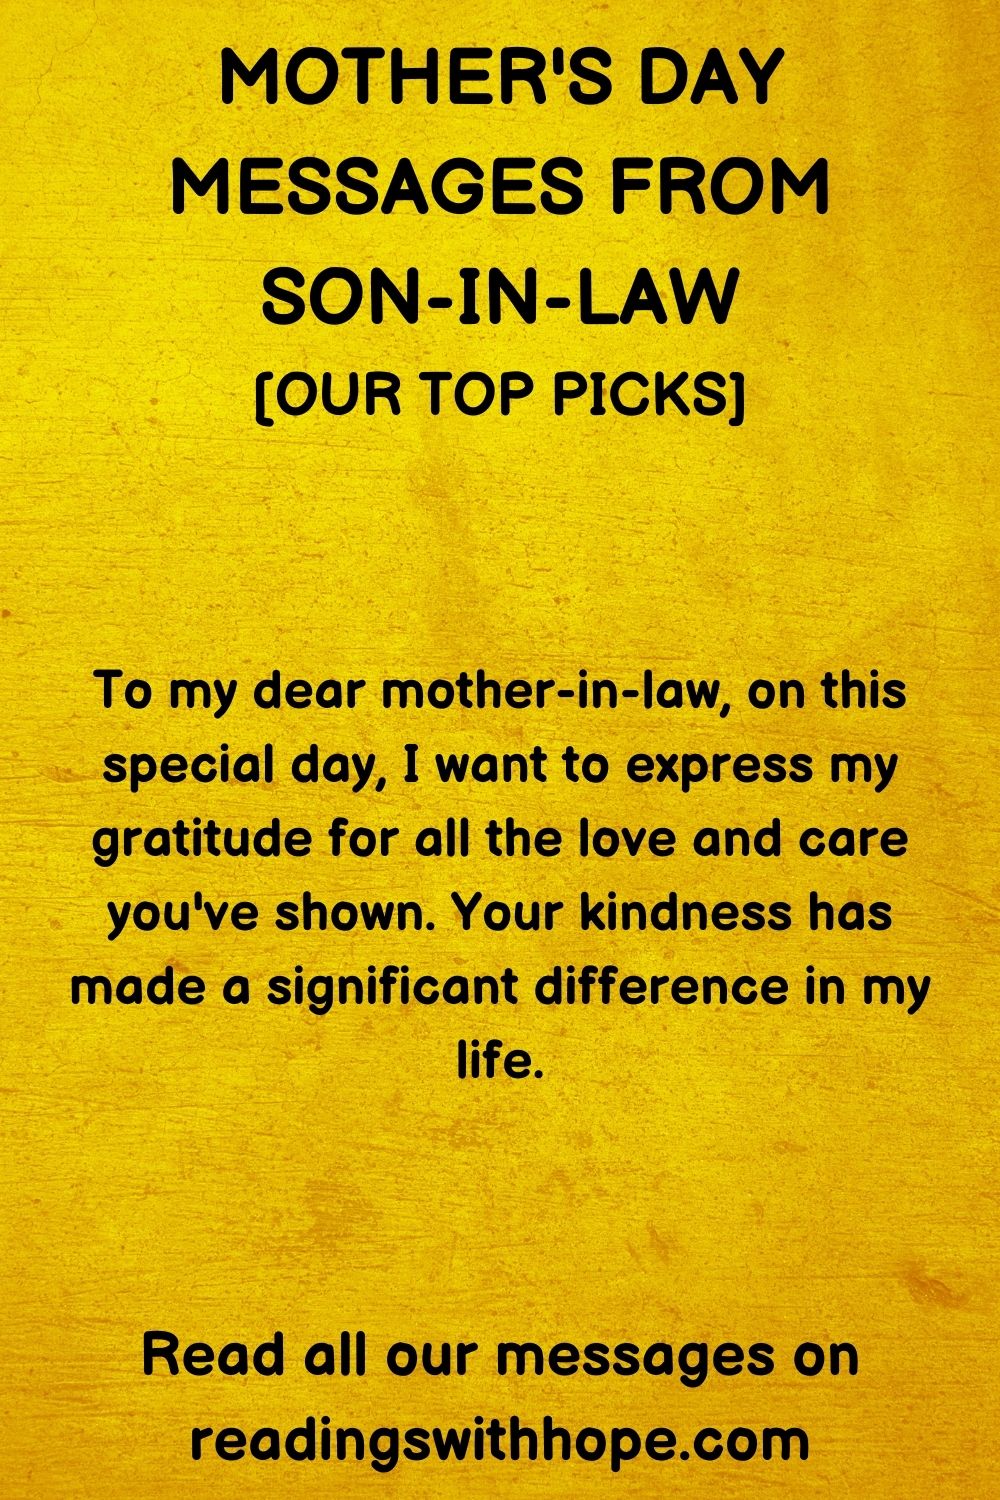 45 Mother's Day Messages From Son-in-Law